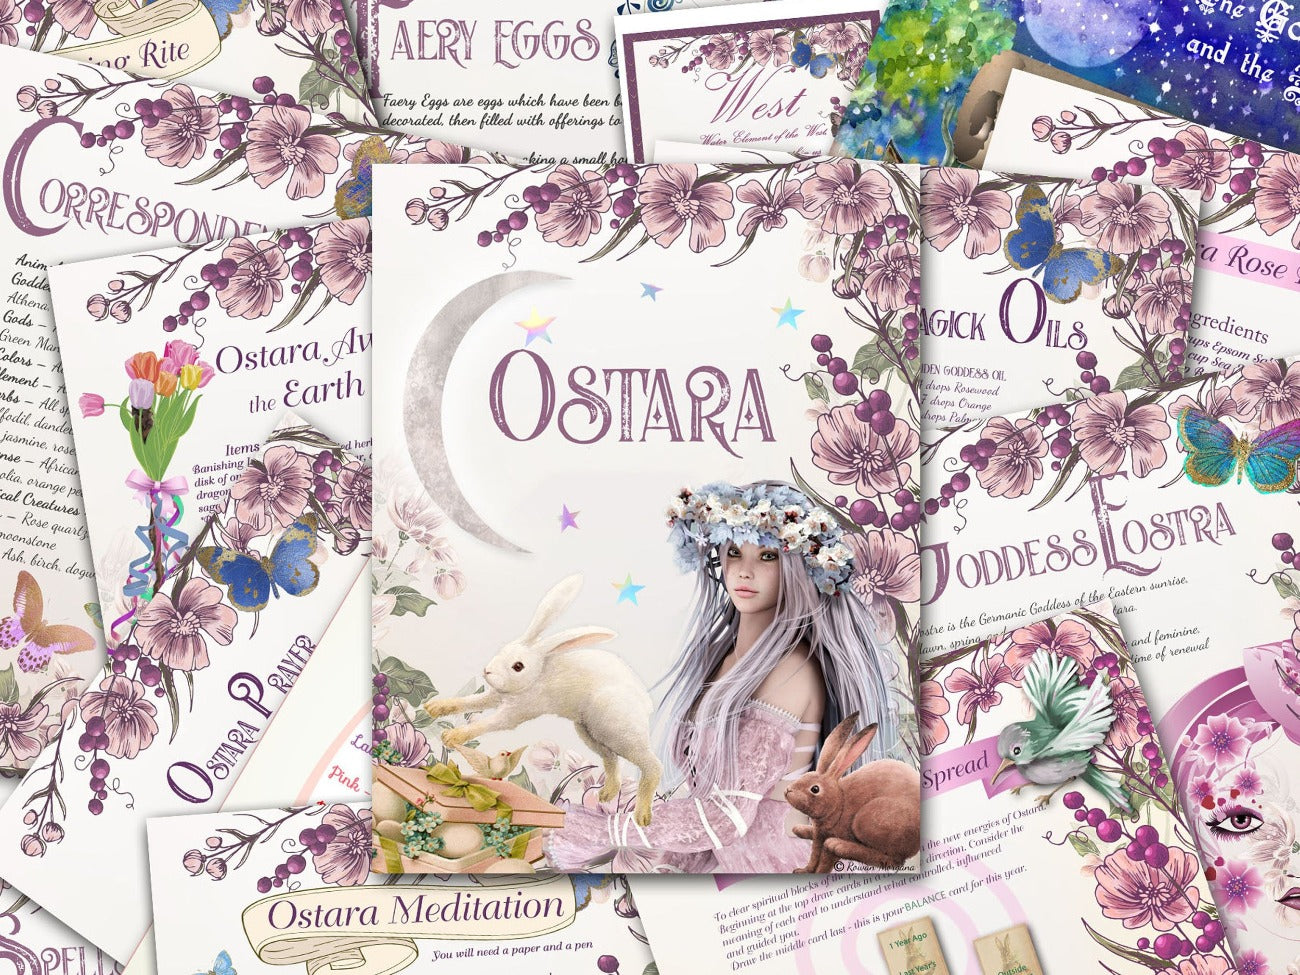 Ostara Bundle Pages, Wicca Witch Seaonal Celebrations, Baby Witch, Wheel of the Year, Sabbat Grimoire, Sabbat Traditions - Morgana Magick Spell